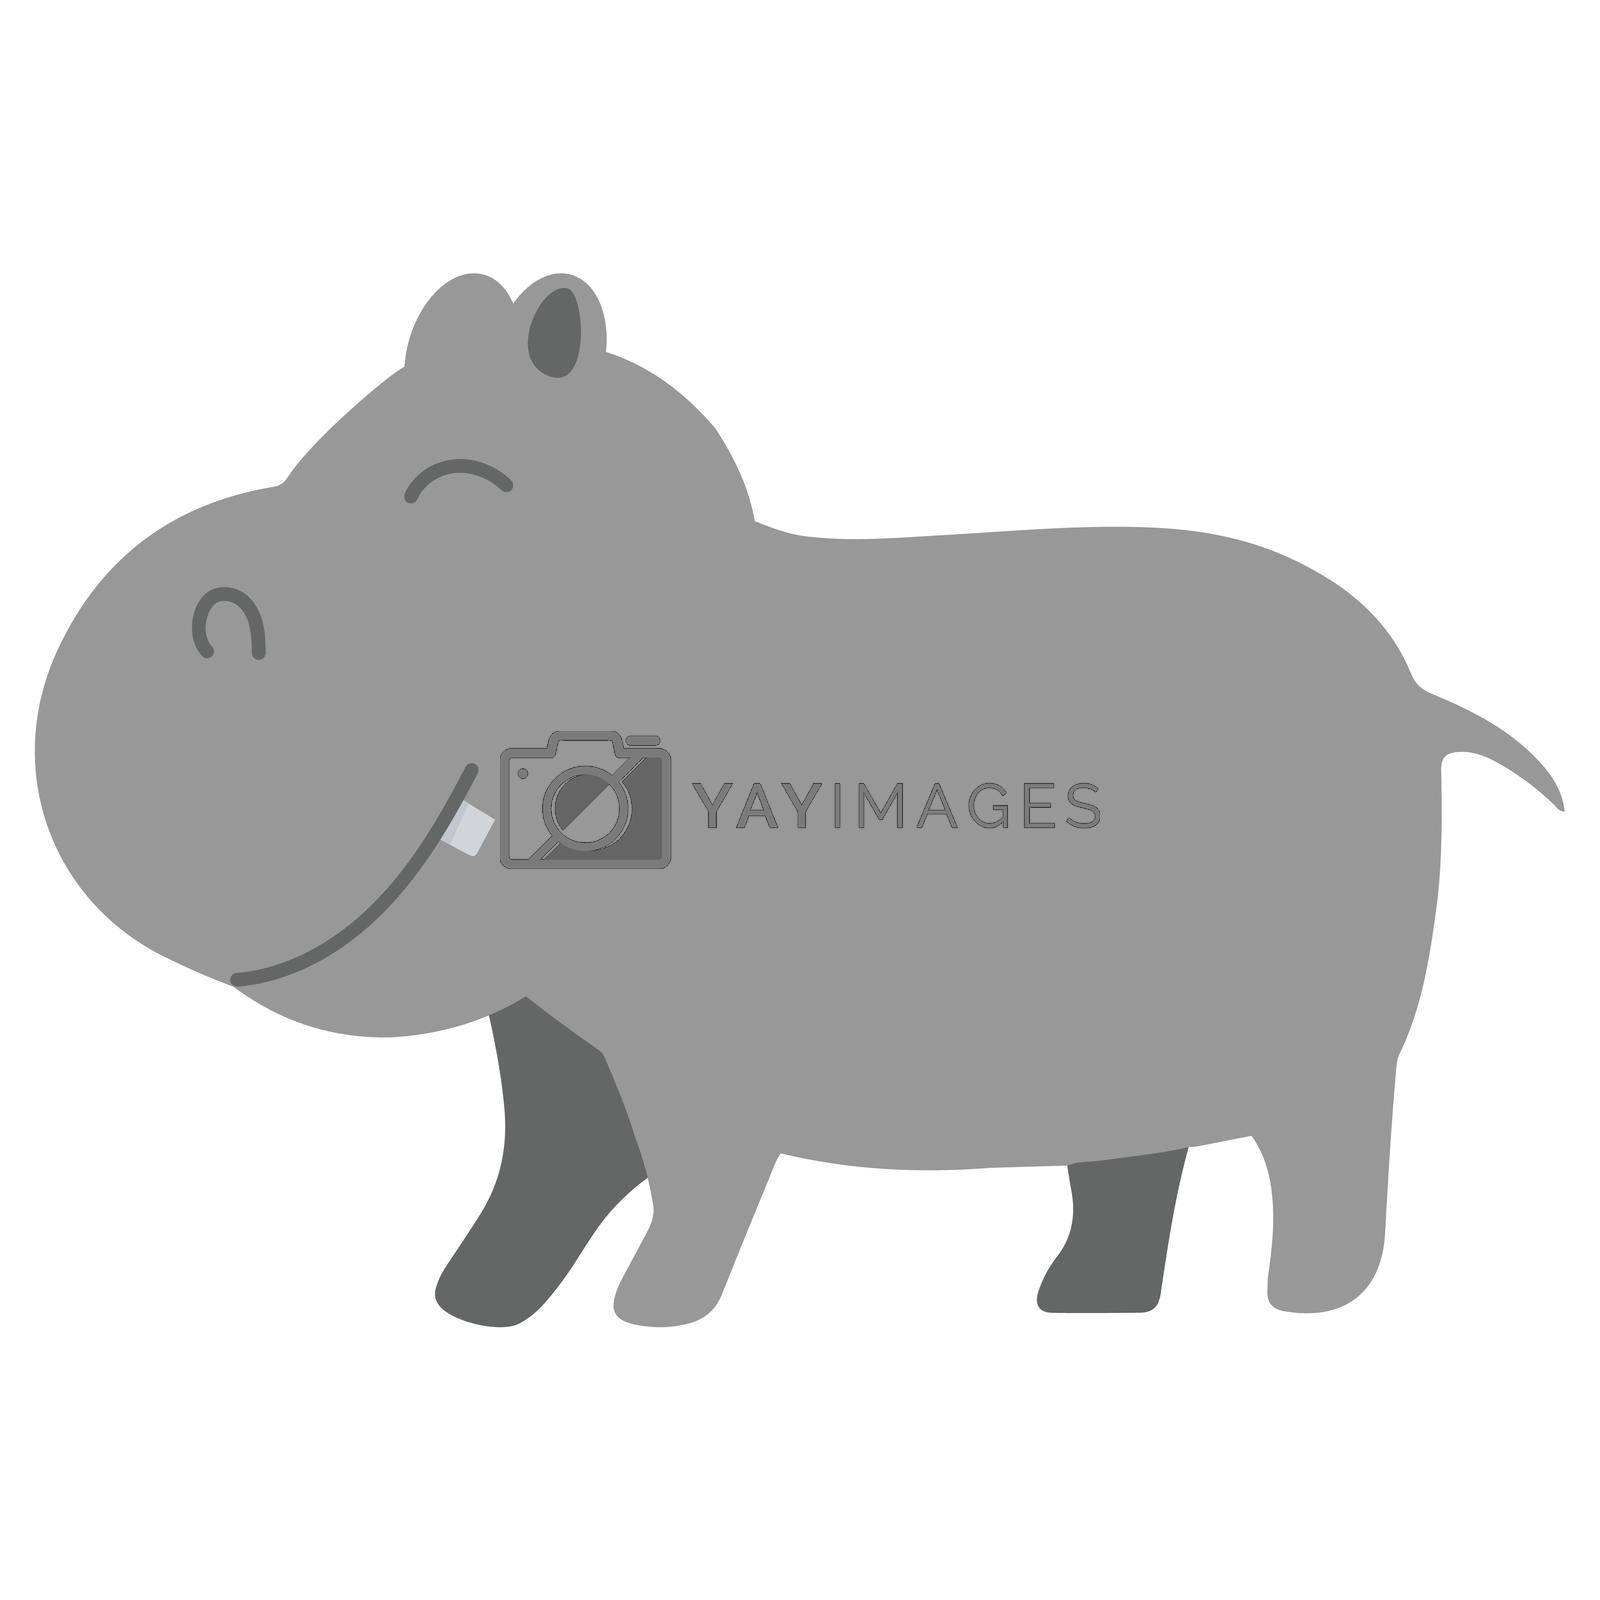 Royalty free image of Cartoon Hippo doodle animal for children by focus_bell